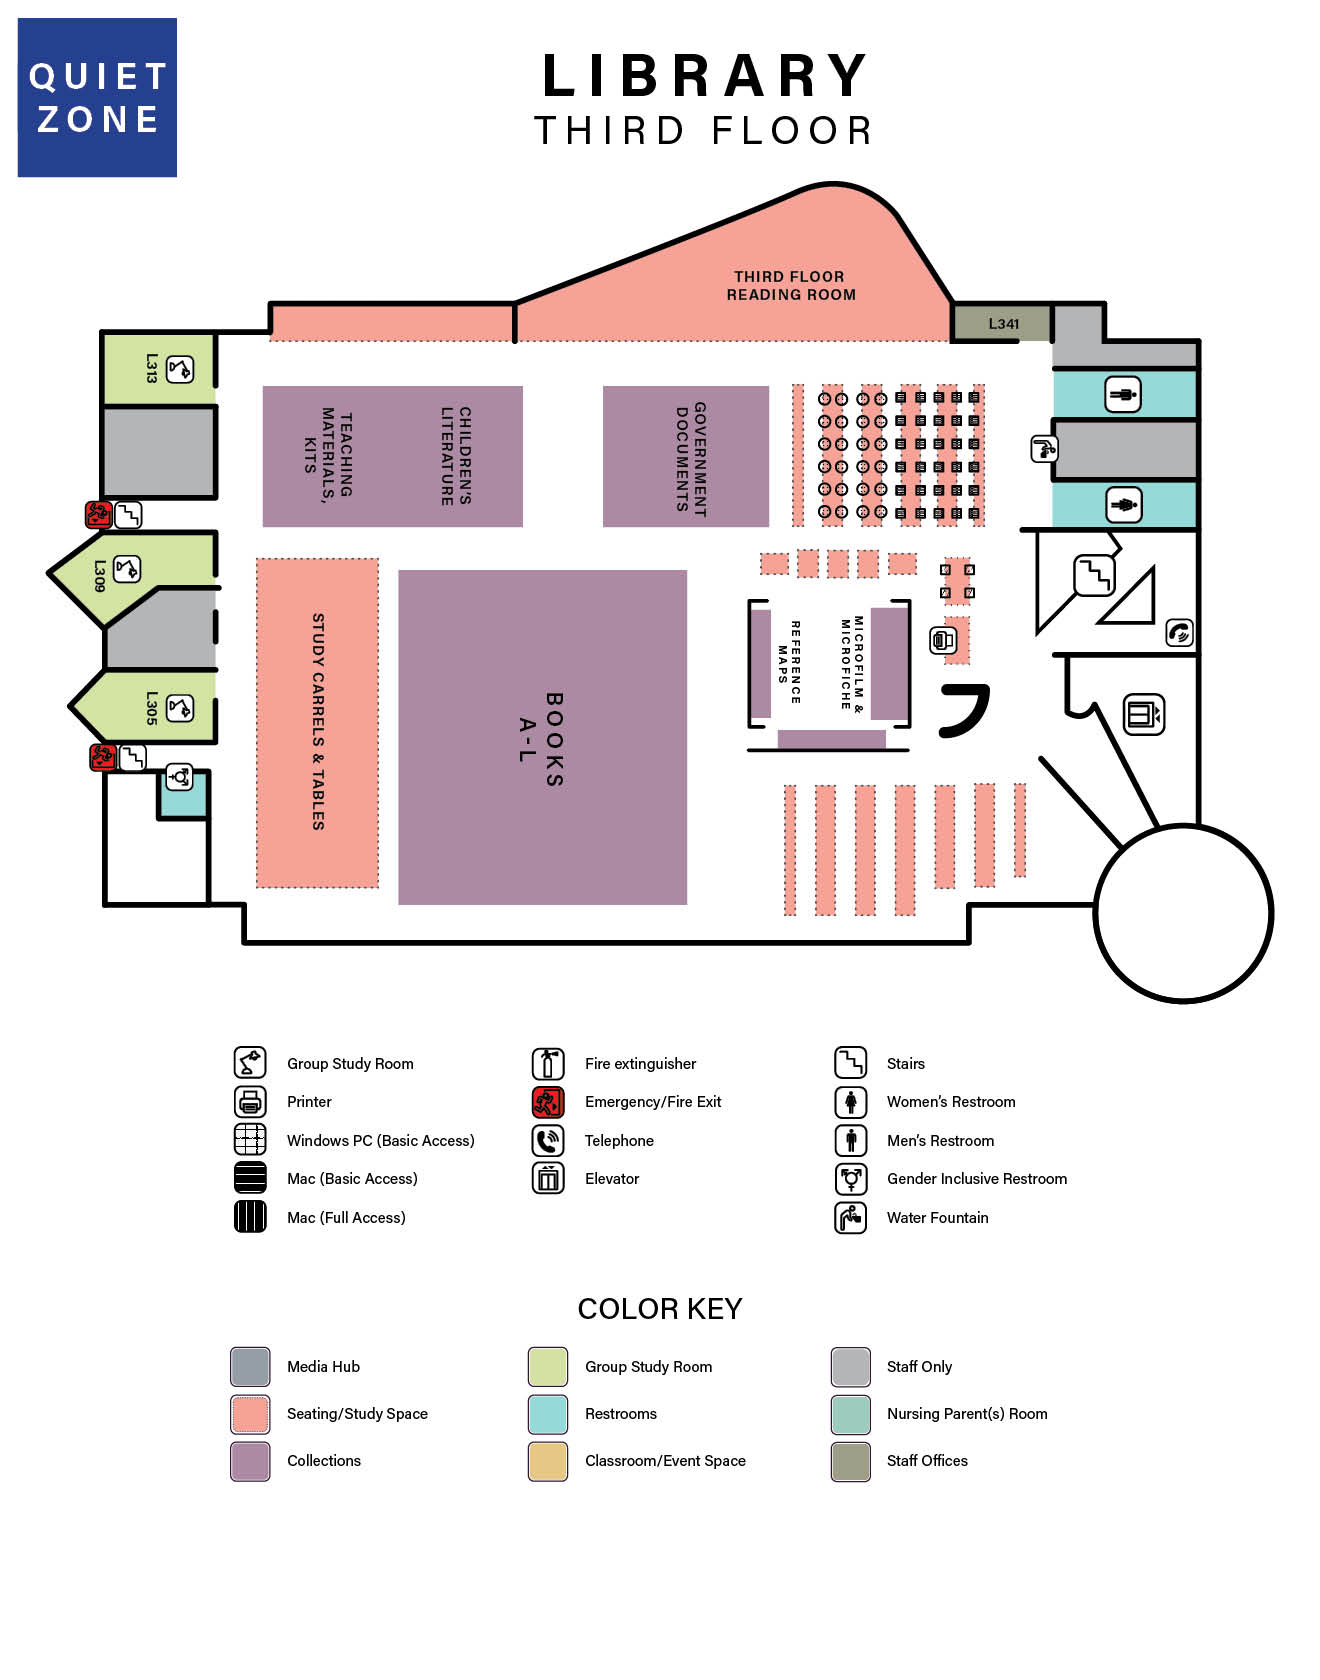 a floor map of of the library third floor, which shows room numbers, and space names, and also includes information such as stairwell access, emergency exits, bathrooms, etc.